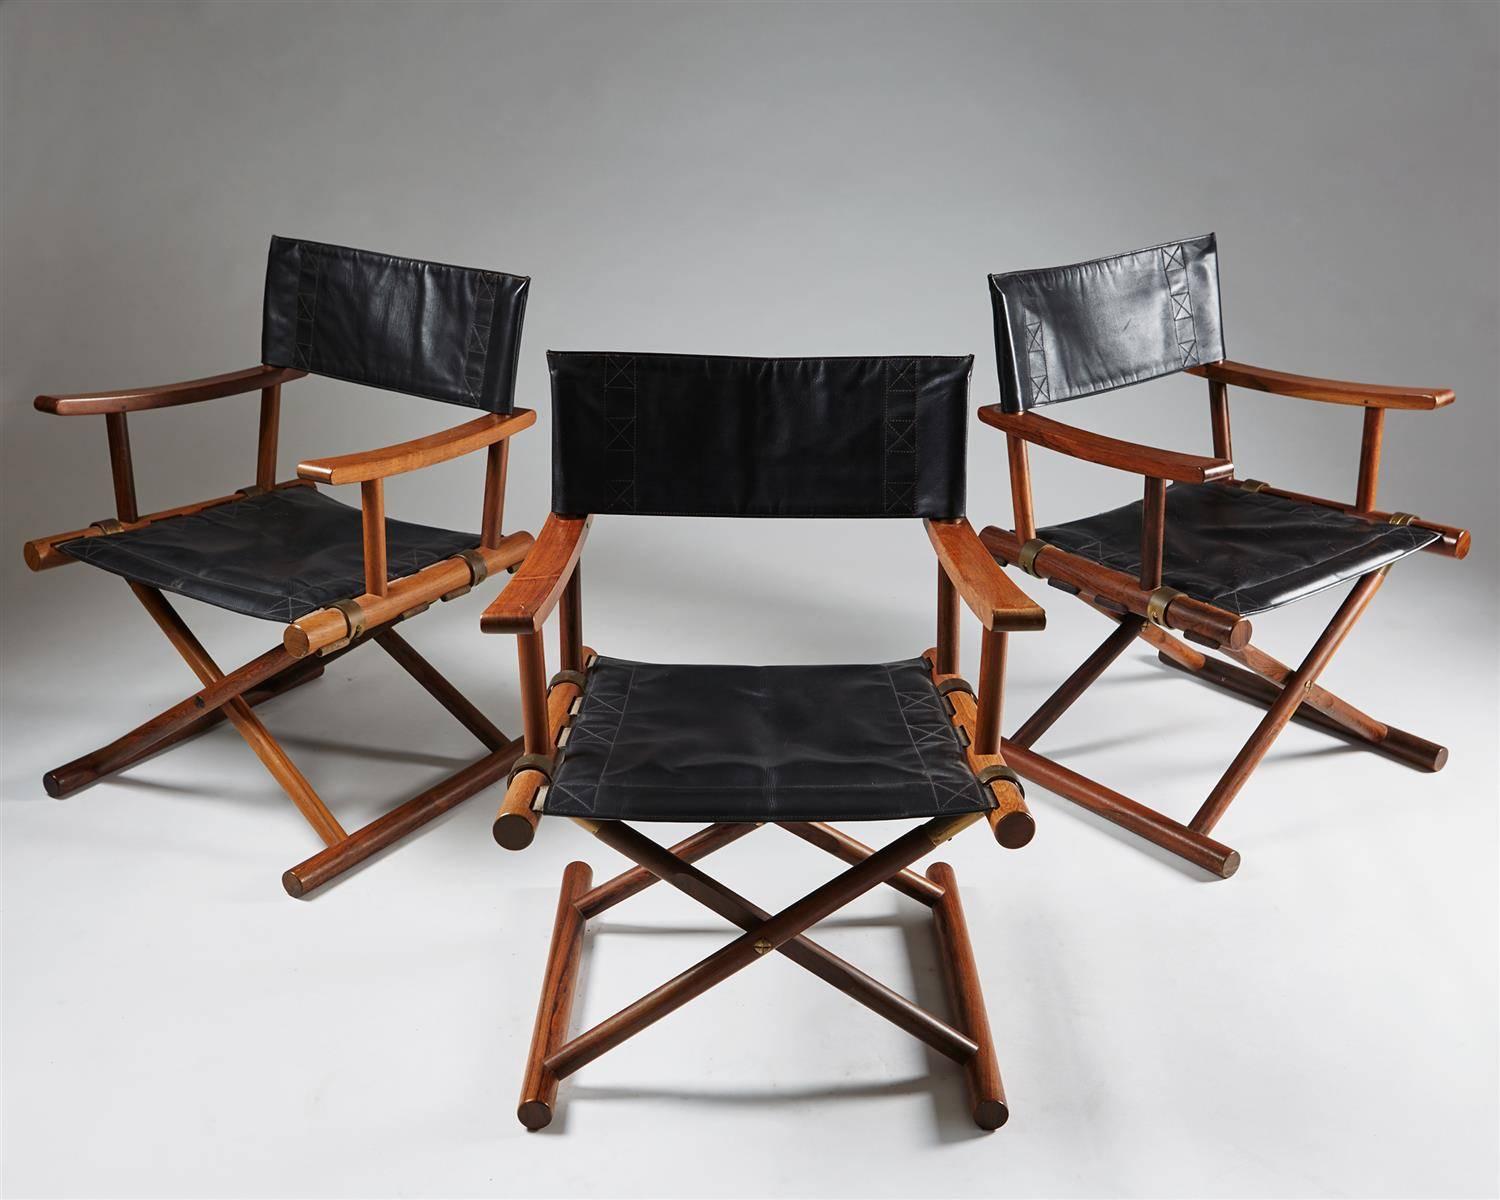 Armchairs designed by Sune Lindström for Nordiska Kompaniet, 
Sweden, 1960s.
Rosewood and leather.